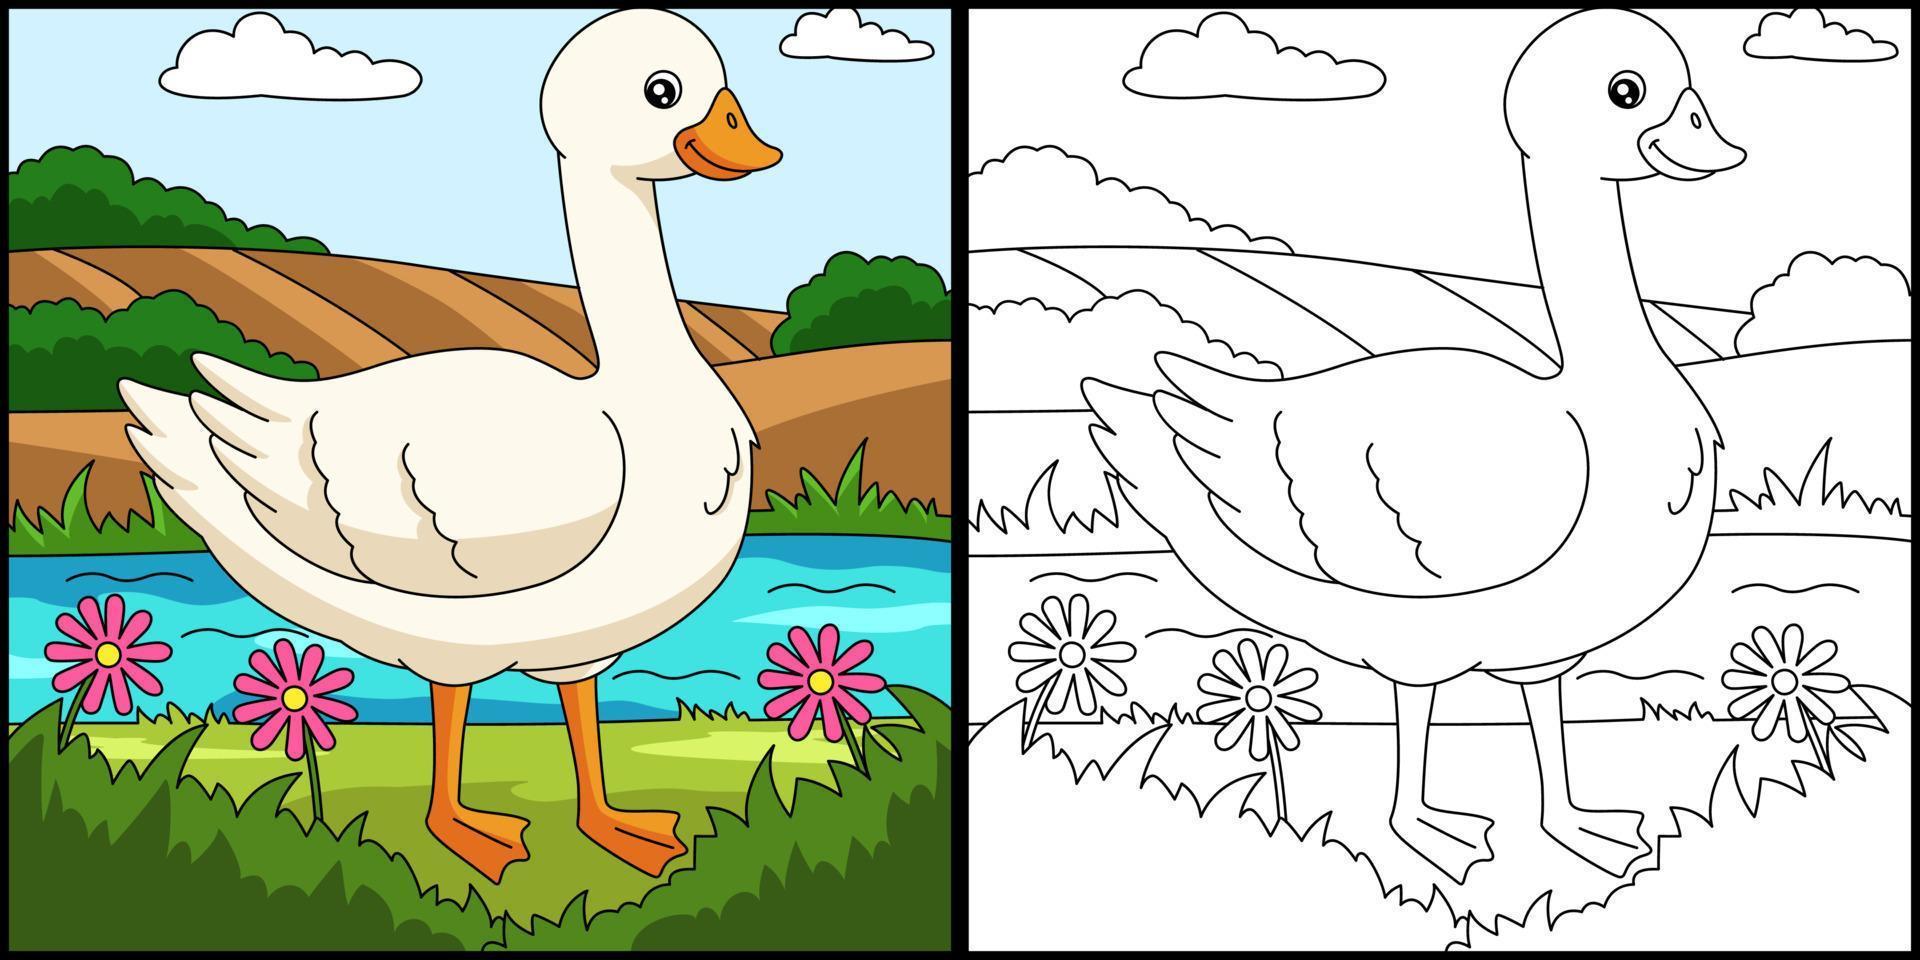 Goose Coloring Page Colored Illustration vector